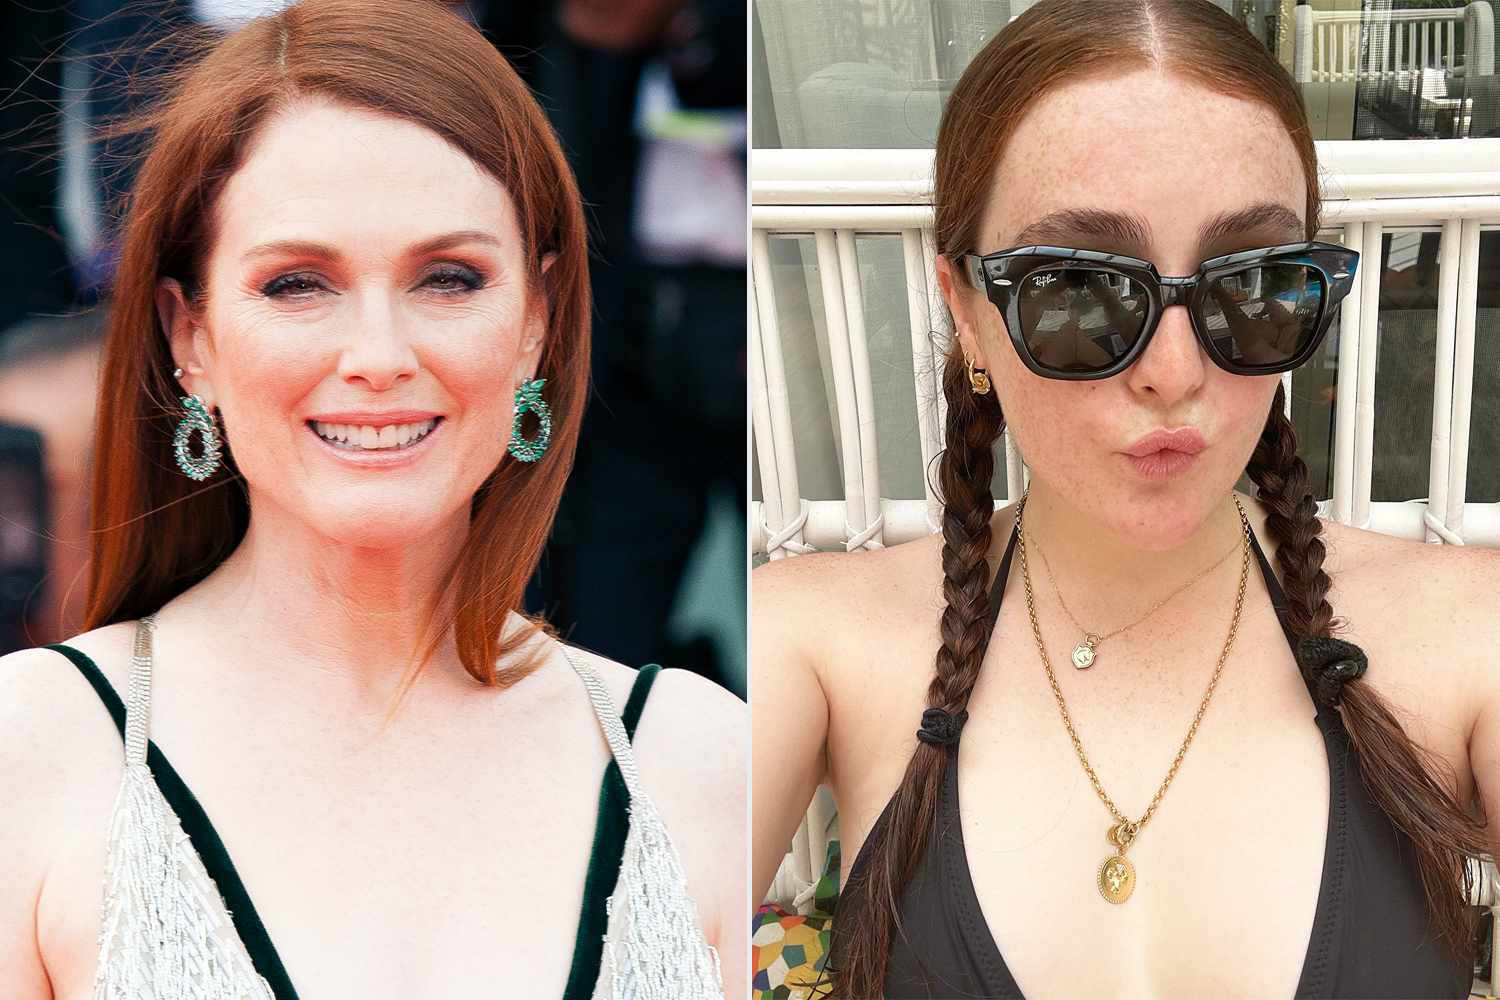 Julianne Moore Shares Sweet Photo Of Lookalike Daughter Liv As She 